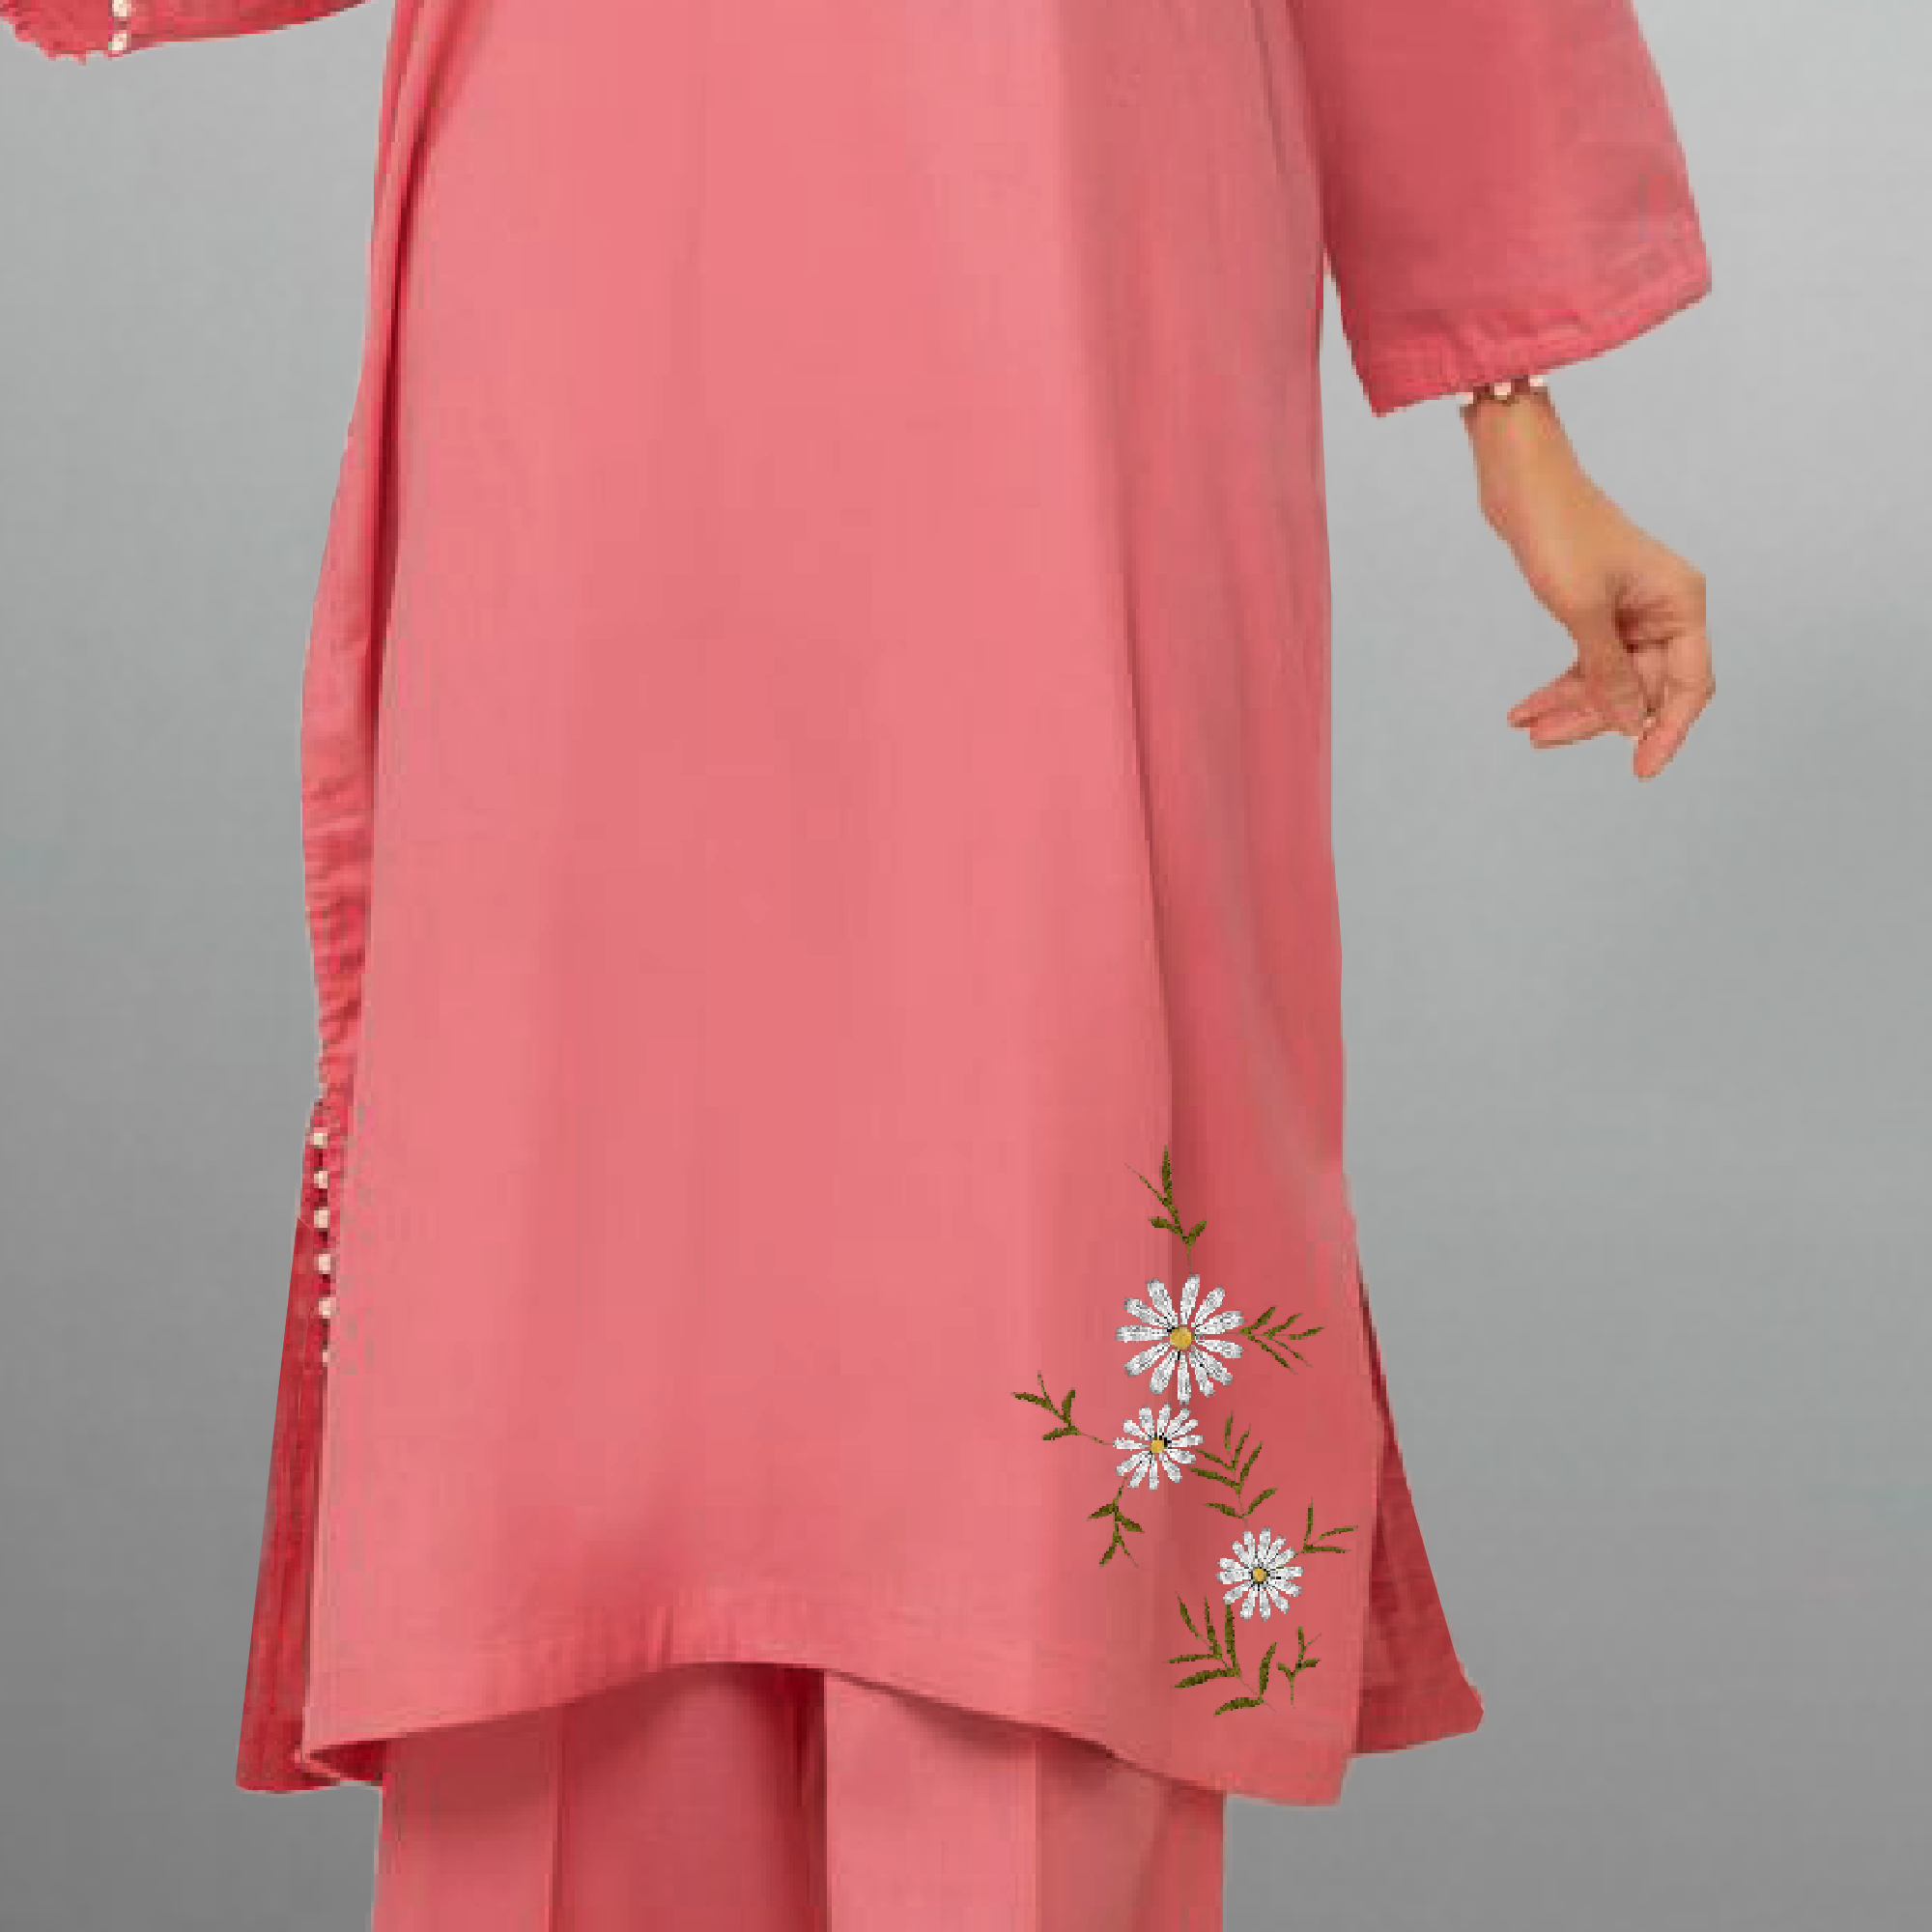 Women's Peach kurti with pearl embellishment and Floral motif with pant-RWKS072